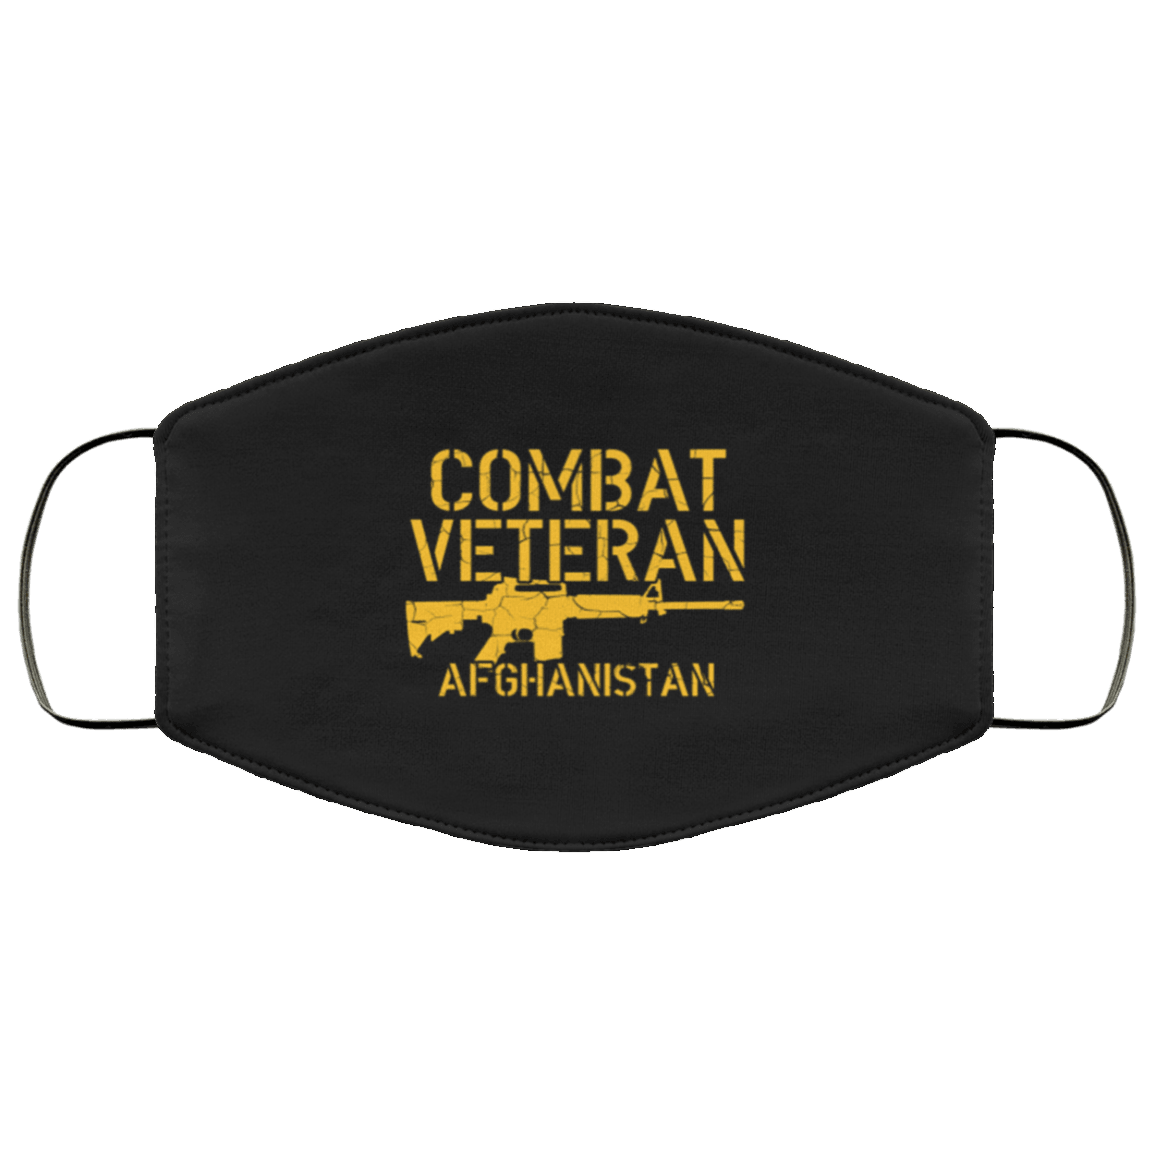 Designs by MyUtopia Shout Out:Combat Veteran Afghanistan Adult Fabric Face Mask with Elastic Ear Loops,3 Layer Fabric Face Mask / Black / Adult,Fabric Face Mask